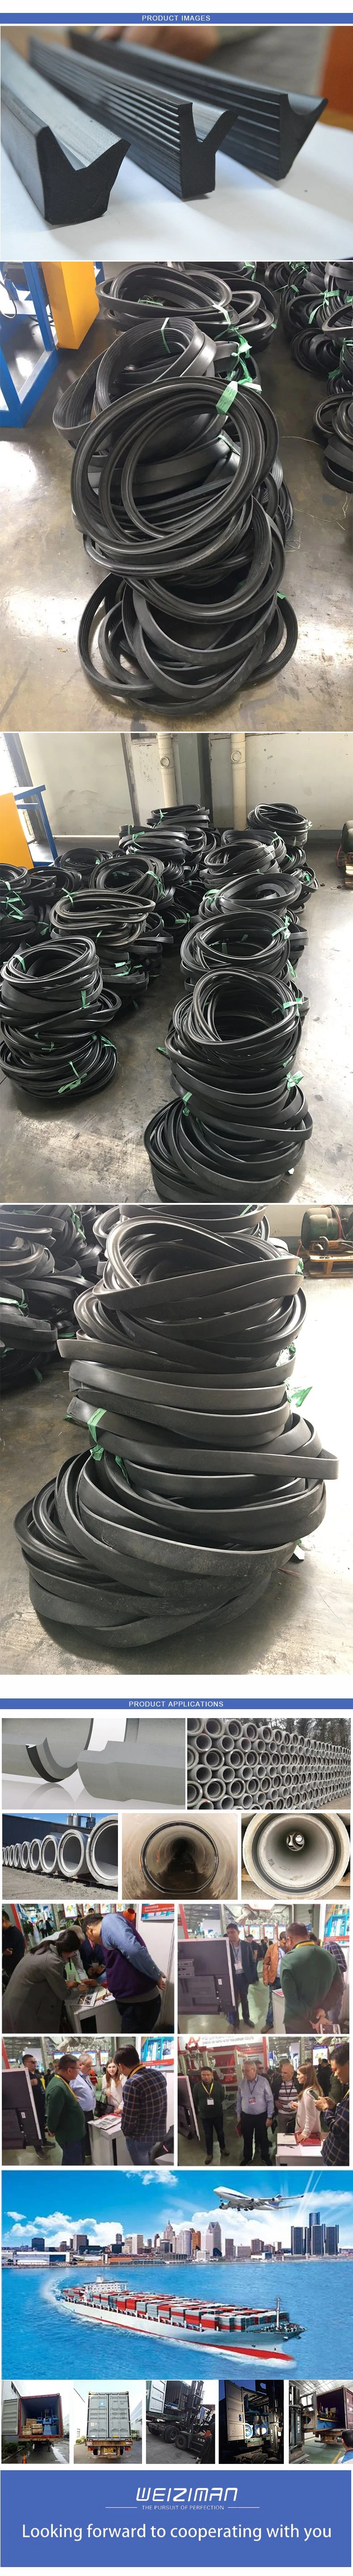 Concrete Pipe and Manhole Gaskets for Construction, Drainage Pipe, Sewer Pipe